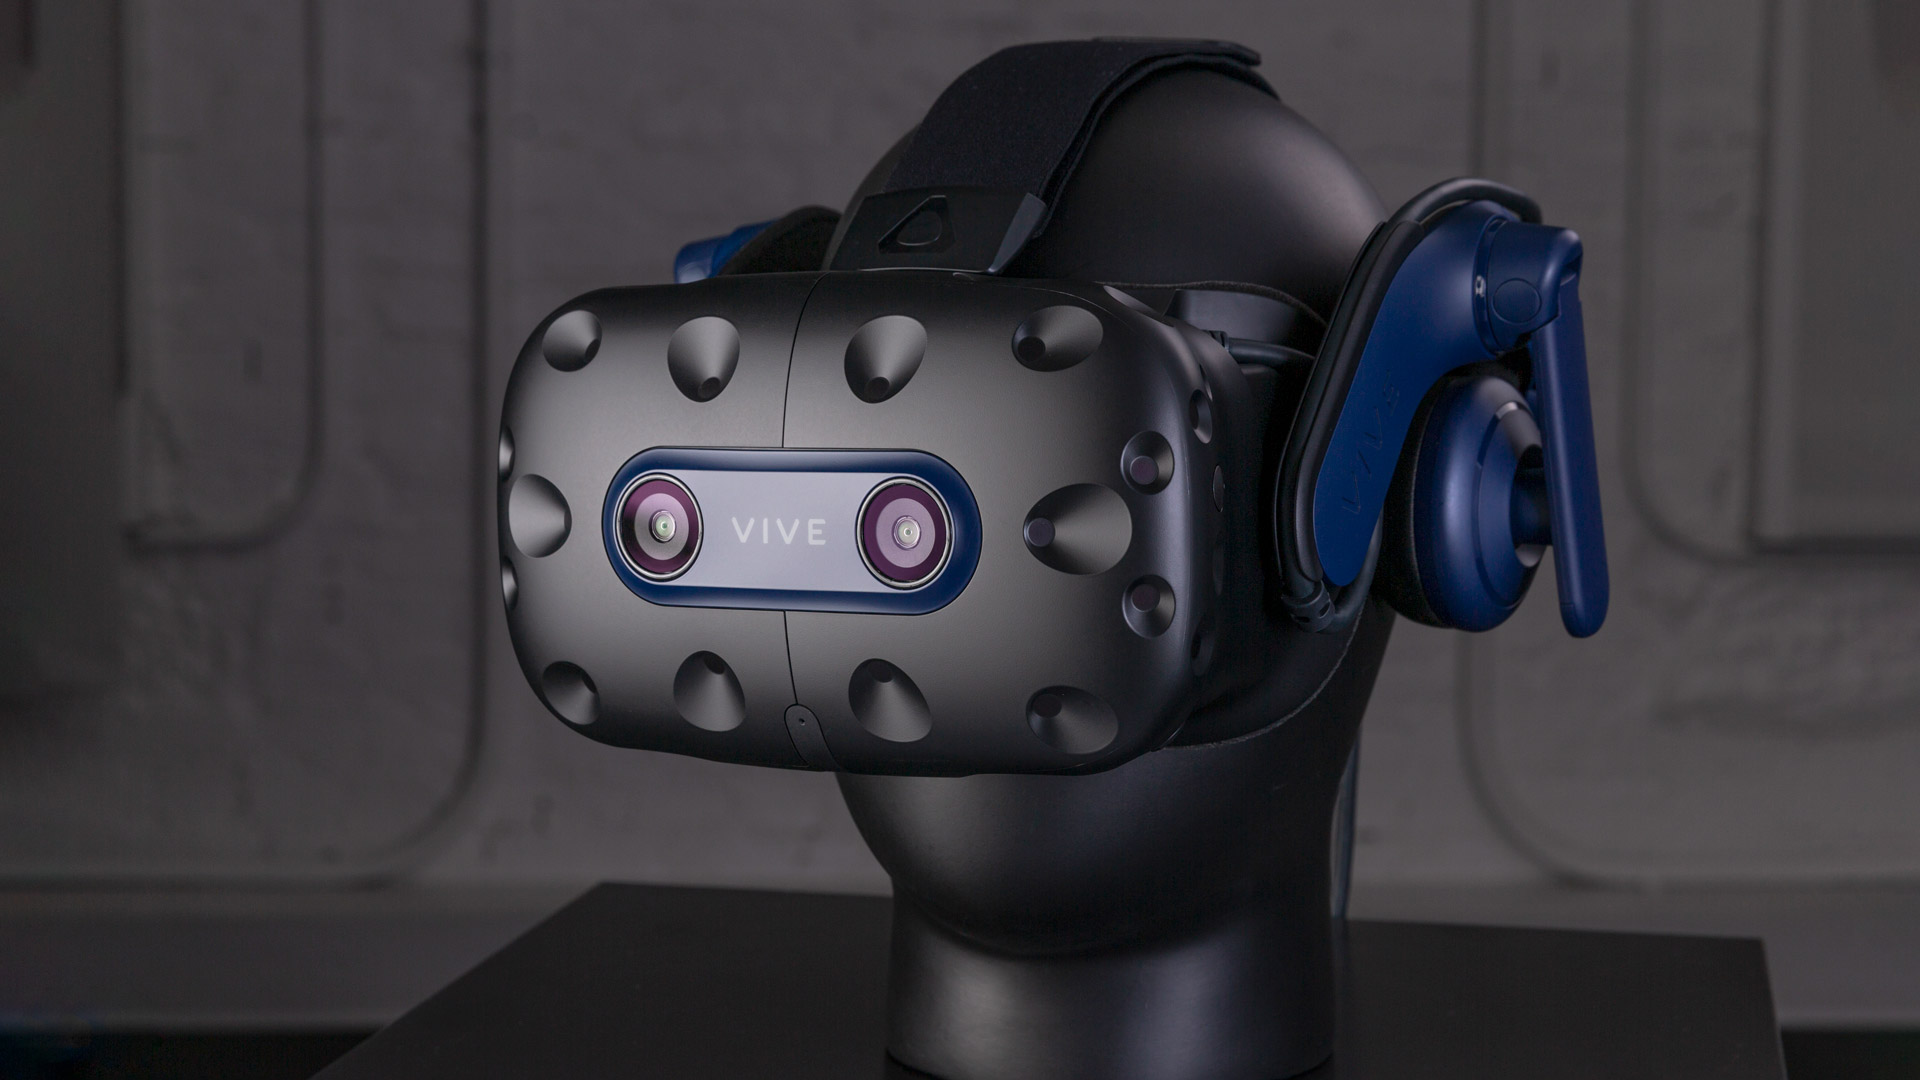 Vive Pro 2 to Launch With 6MP Resolution, 120Hz, 120° field-of